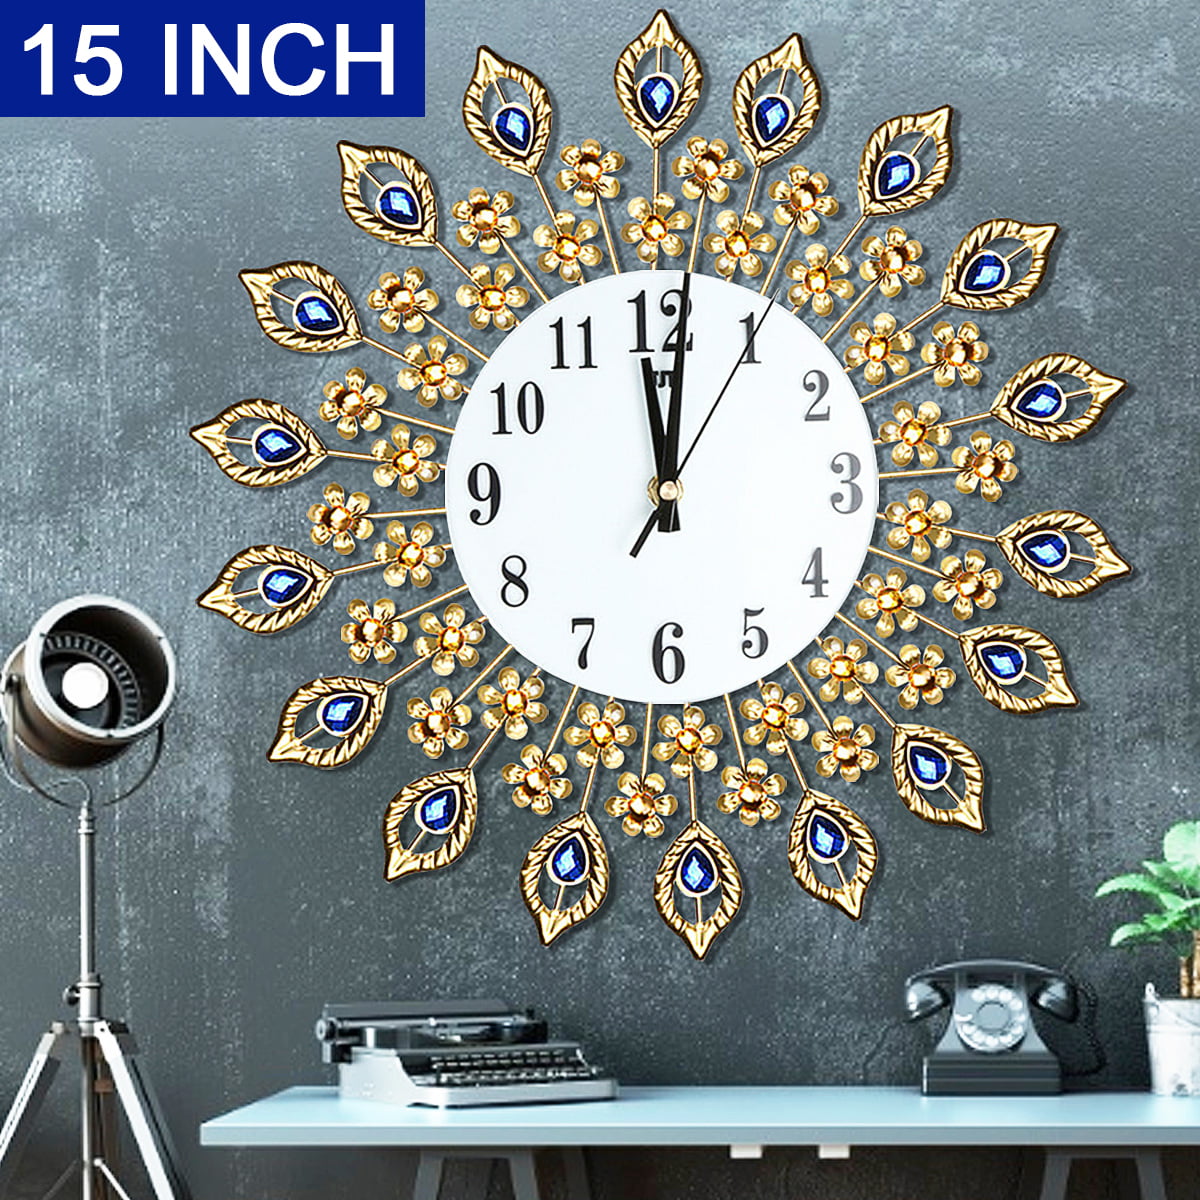 15 INCH Large Vintage Wall Clock Peacock Diamond Gold